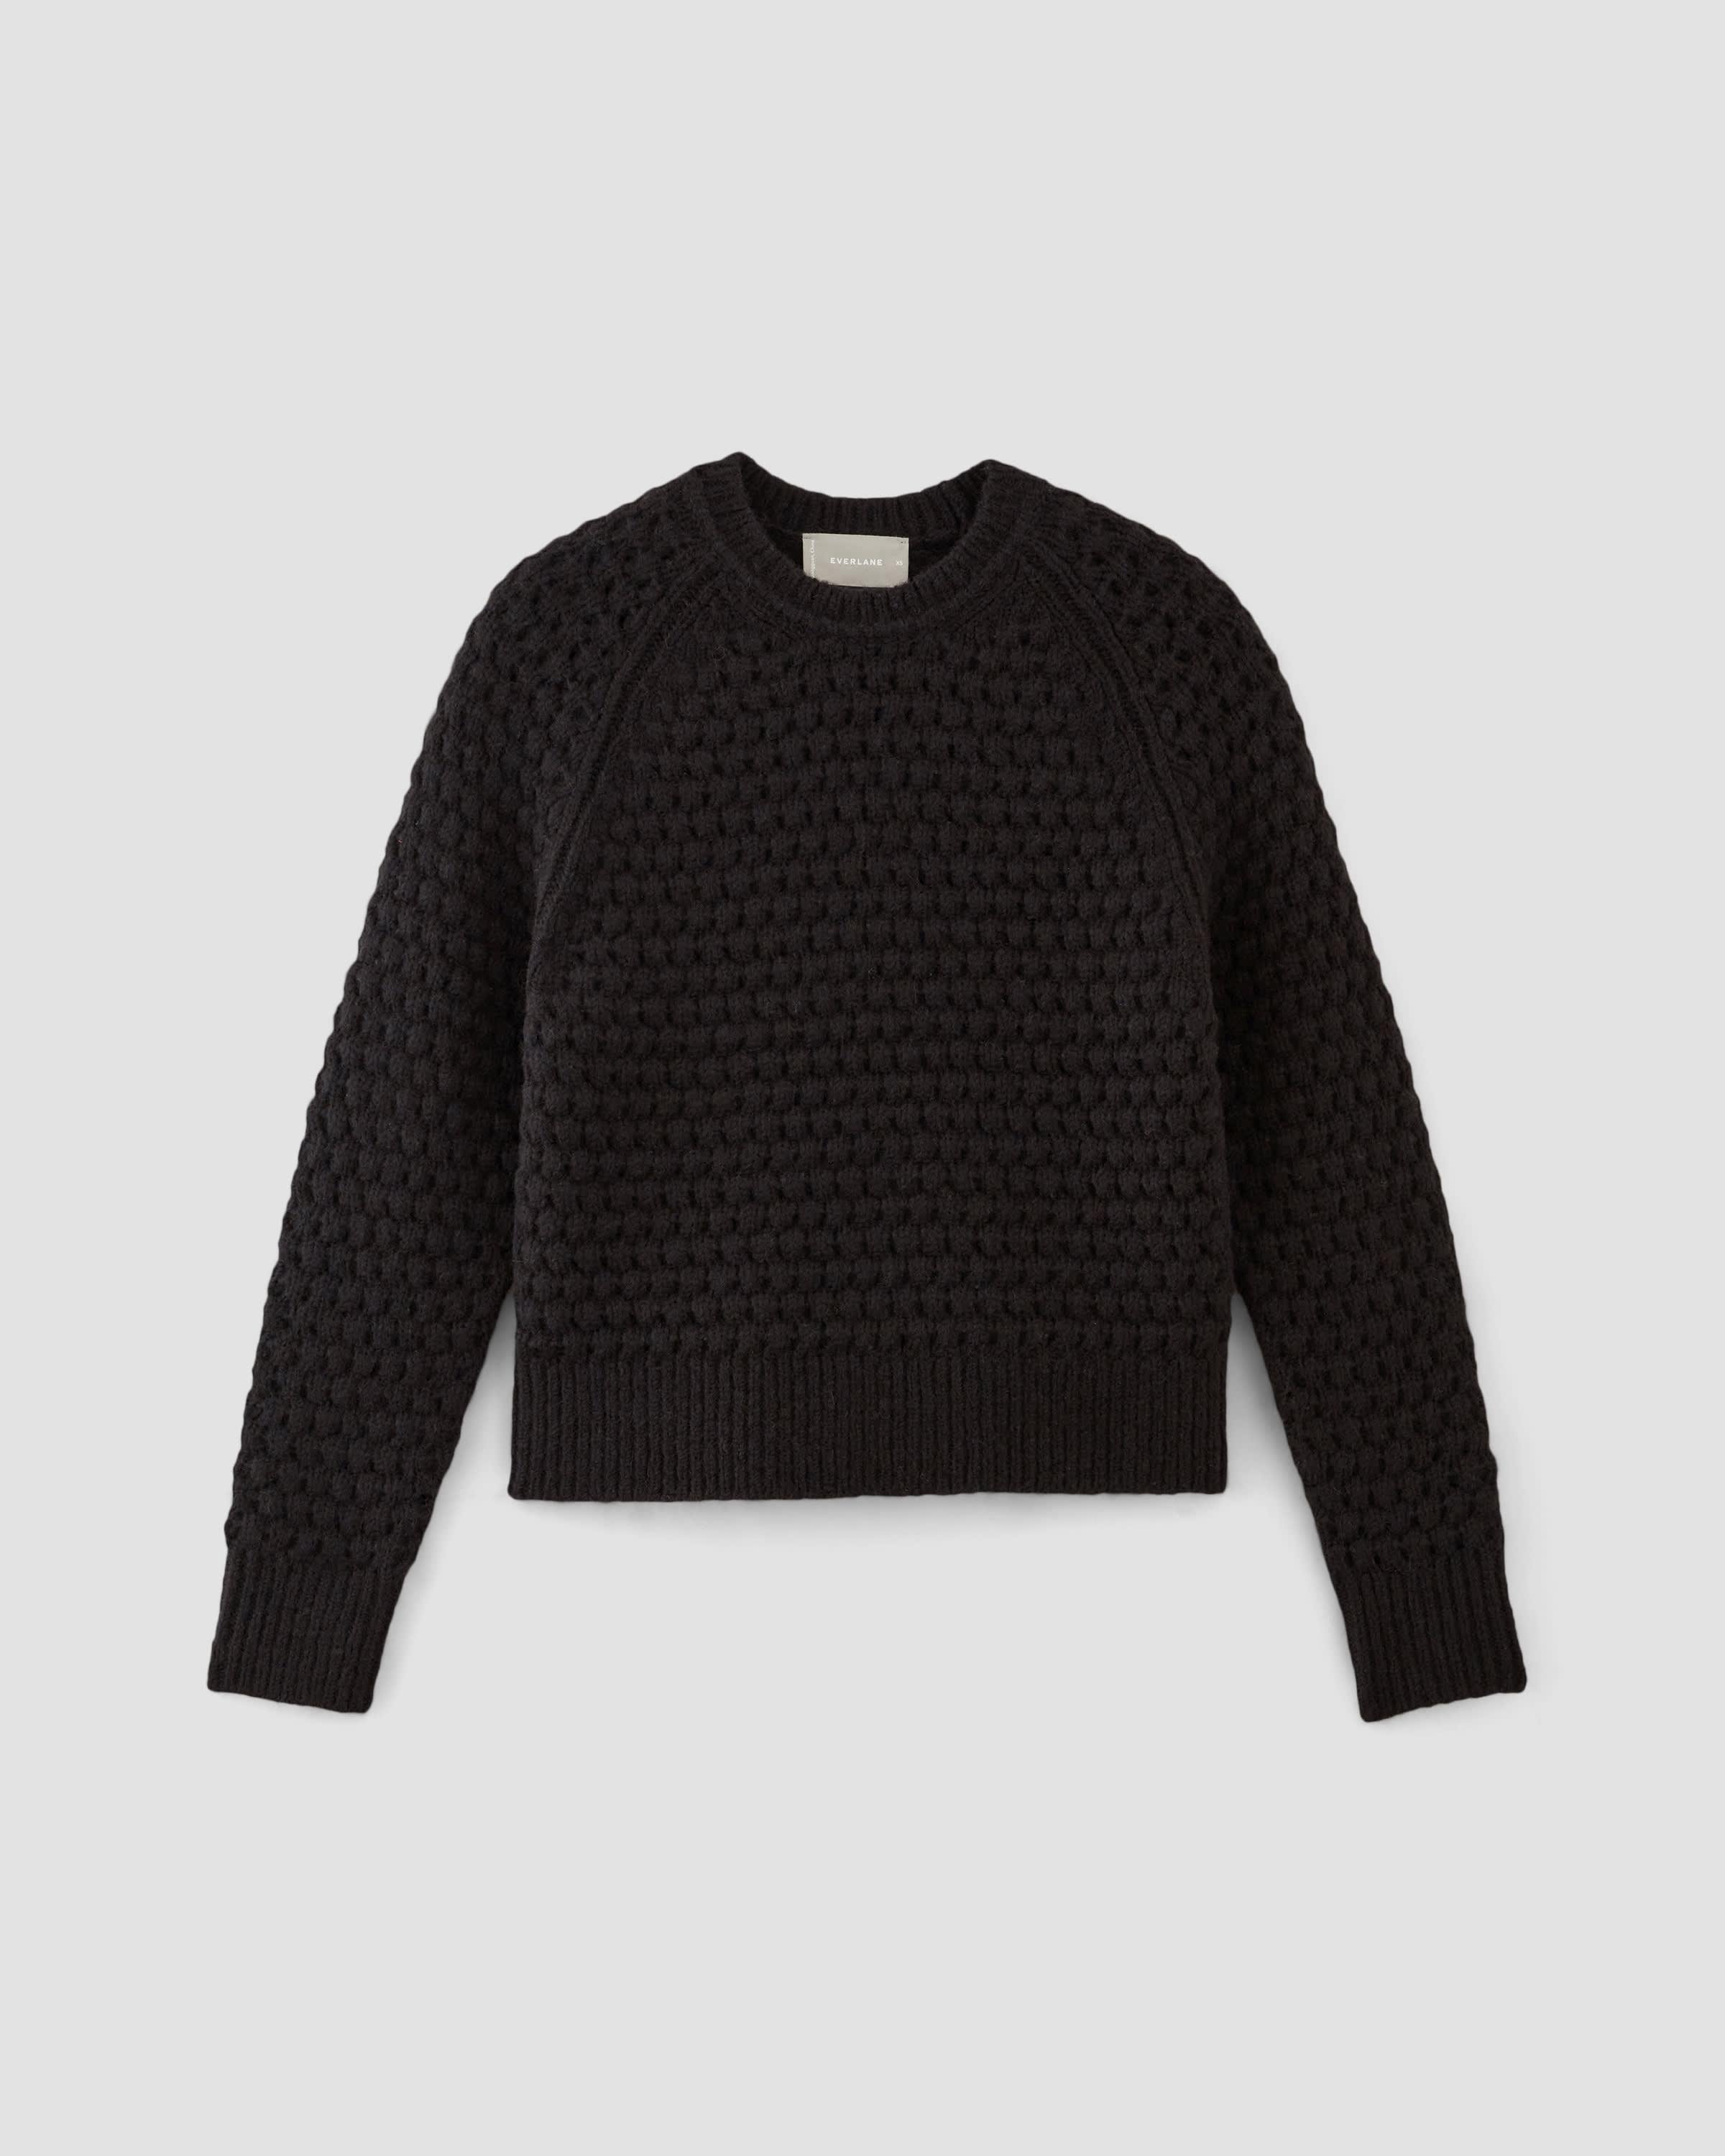 The Cloud Oversized Textured Crew by EVERLANE